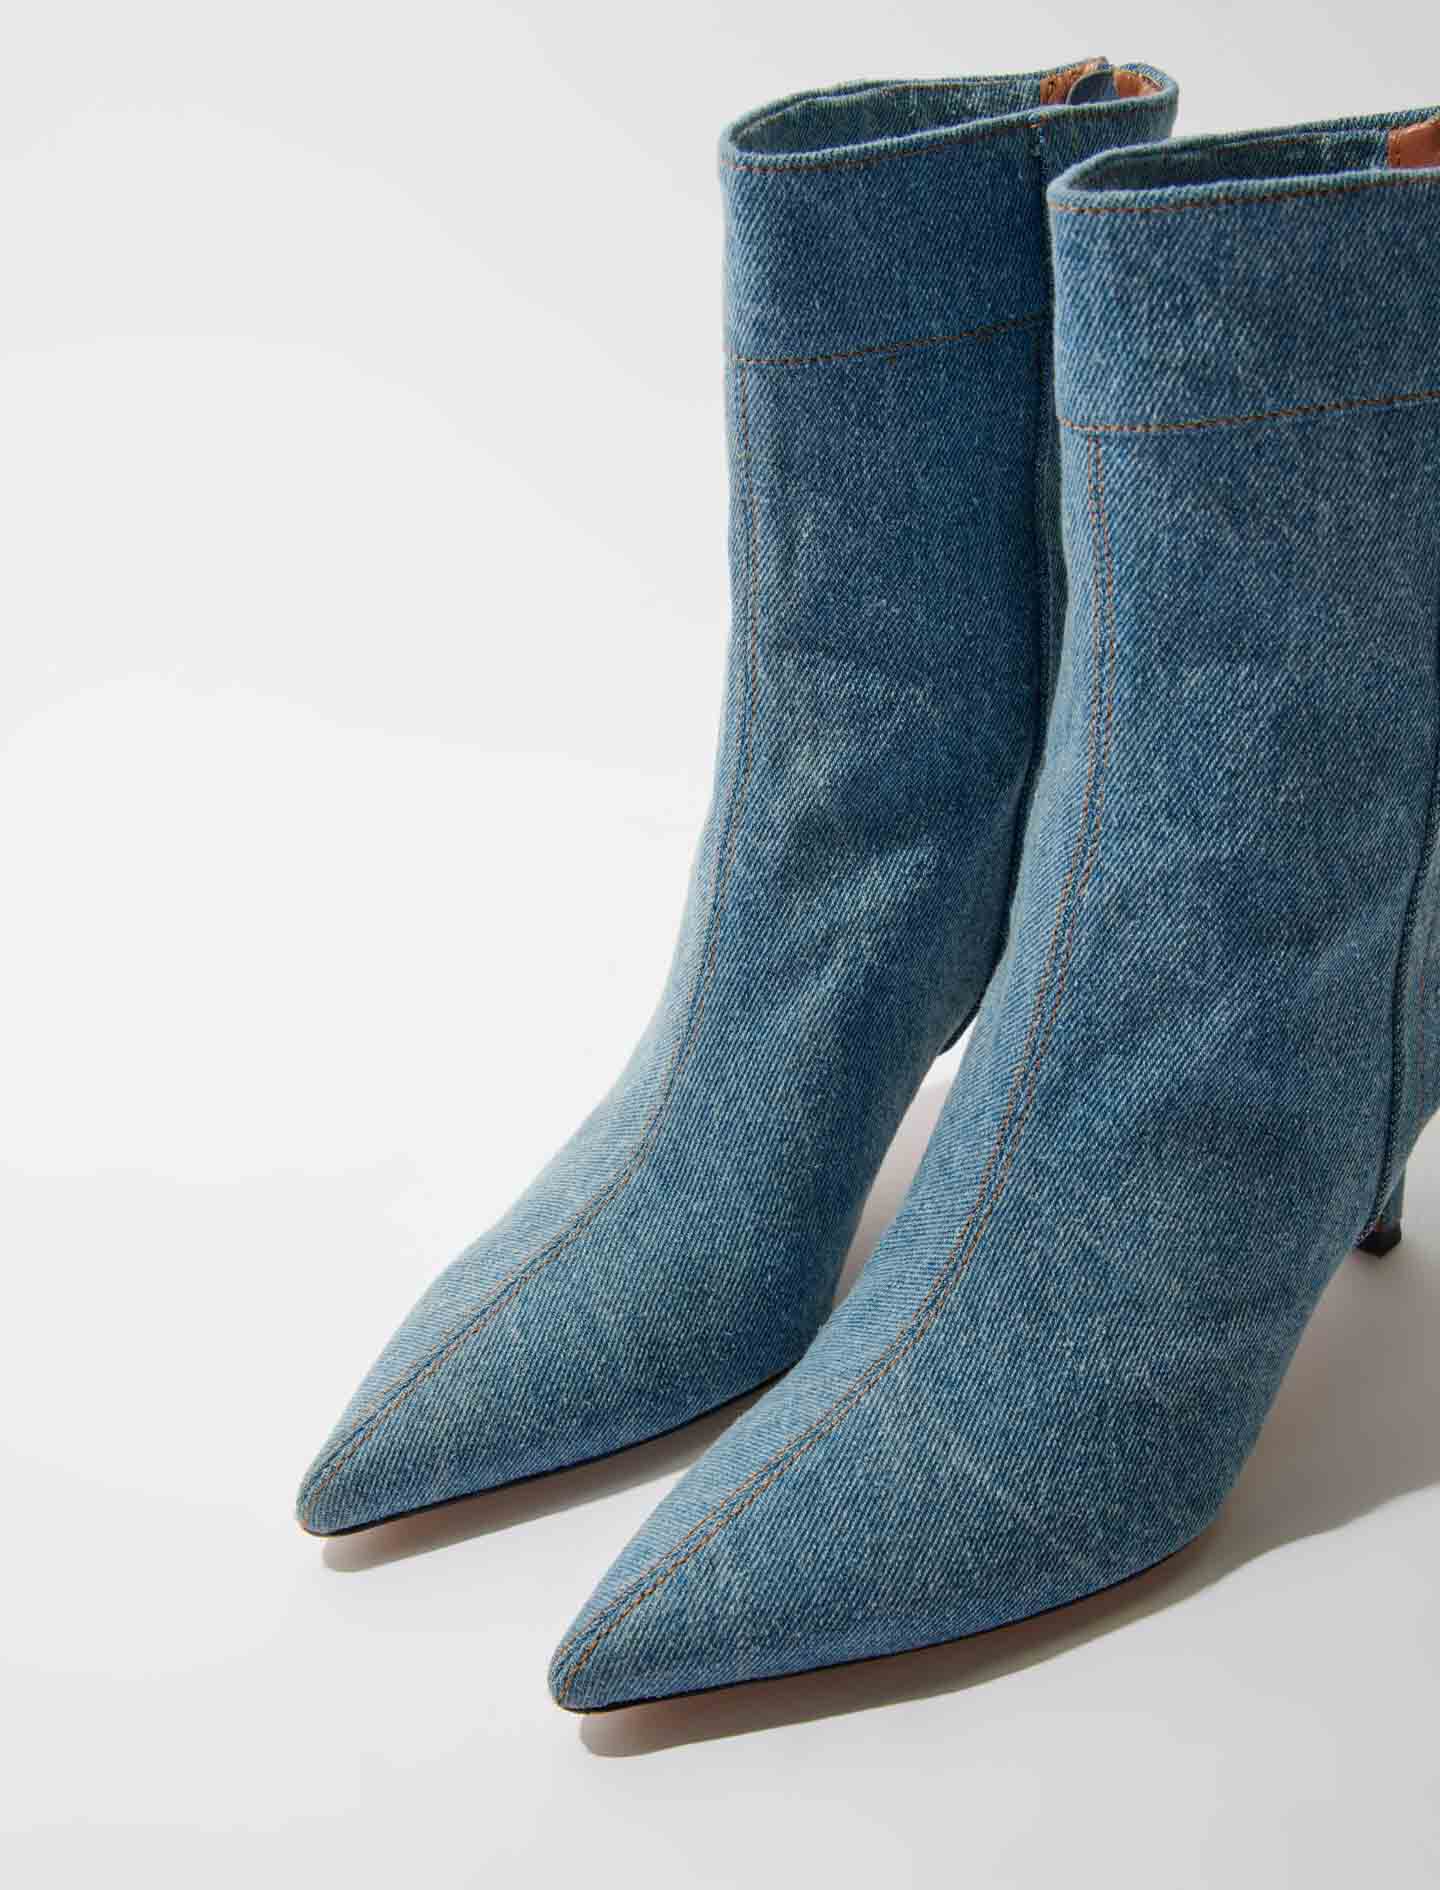 123FAYMONDENIM Denim boots with pointed toe - Boots - Maje.com